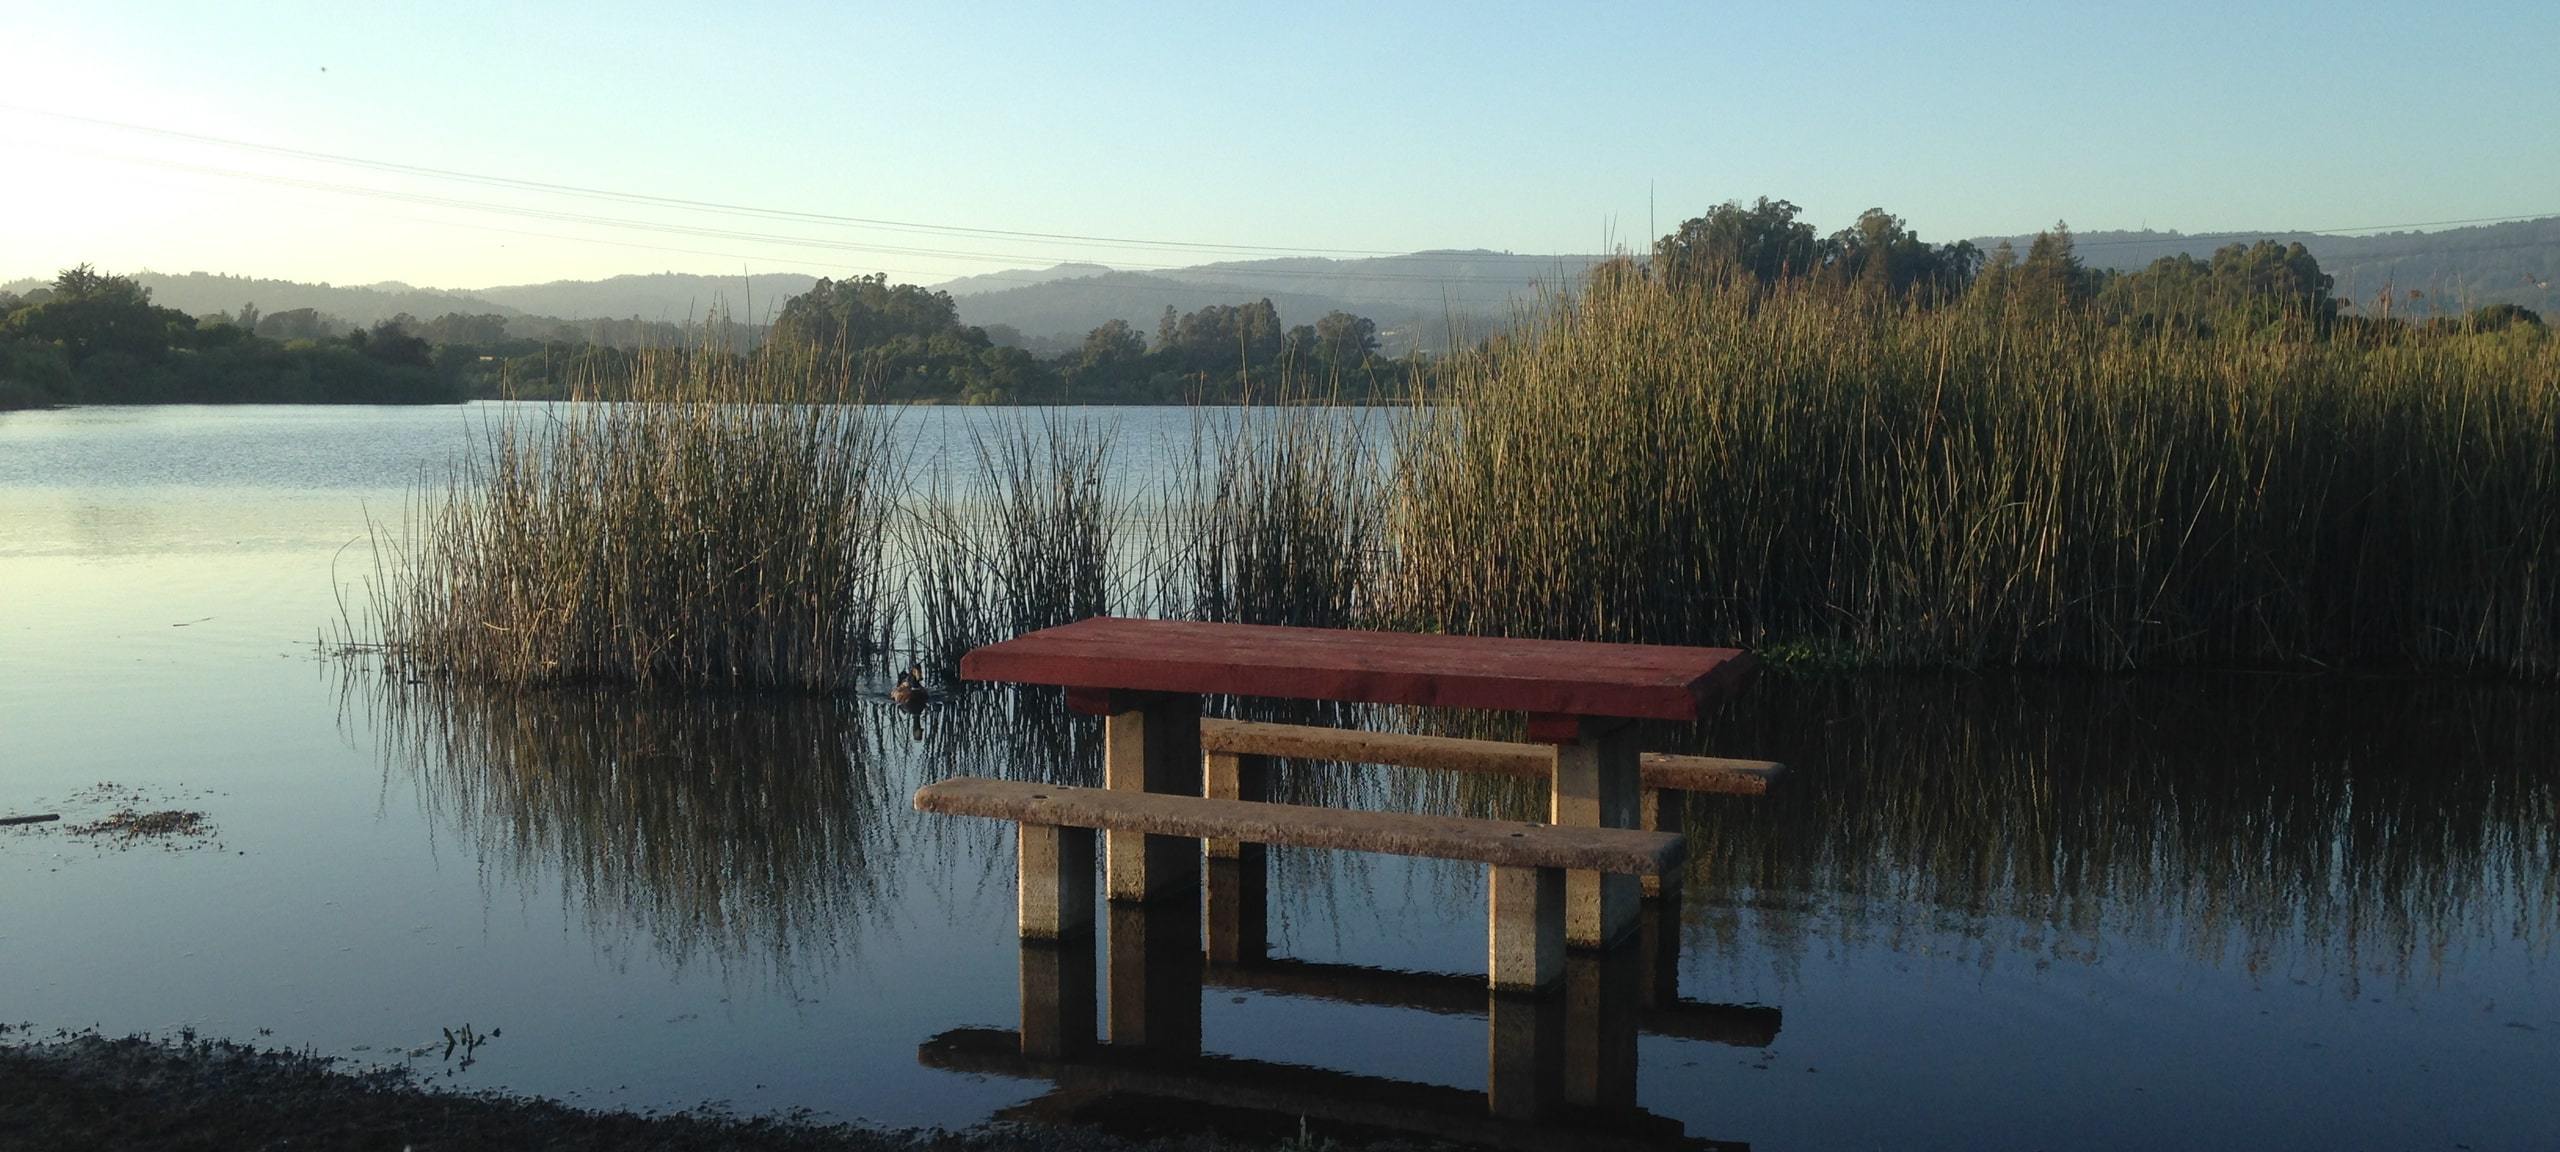 Sunrise at Pinto Lake City Park in Watsonville, CA